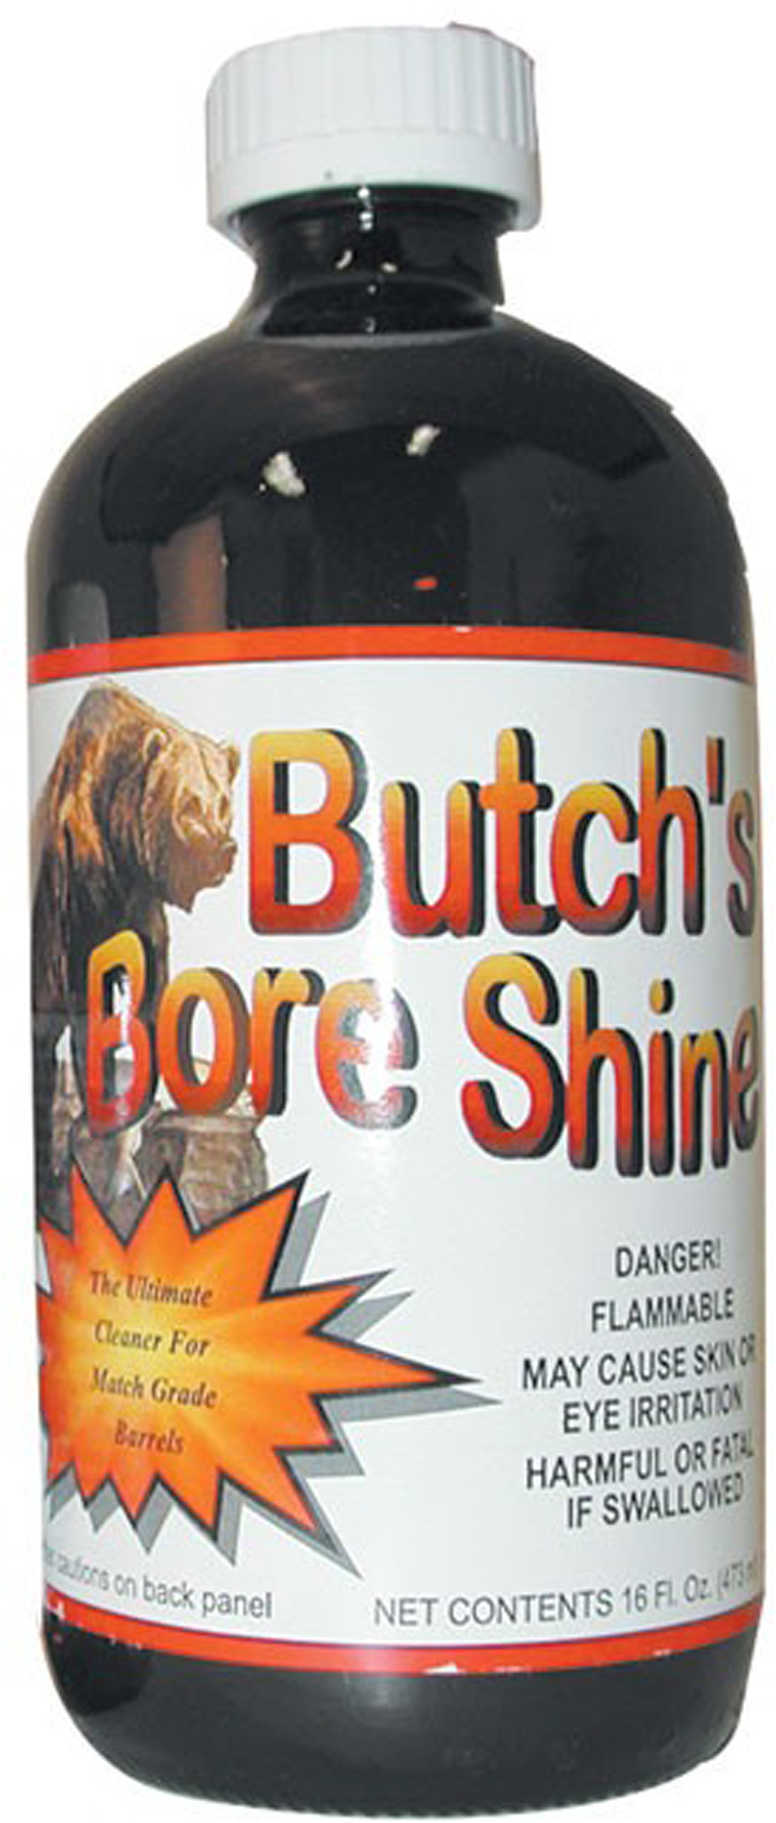 Lyman Butchs Bore Shine - 4 Oz. Non-Abrasive Chemical Solvent Designed To remove All forms Of Fouling including